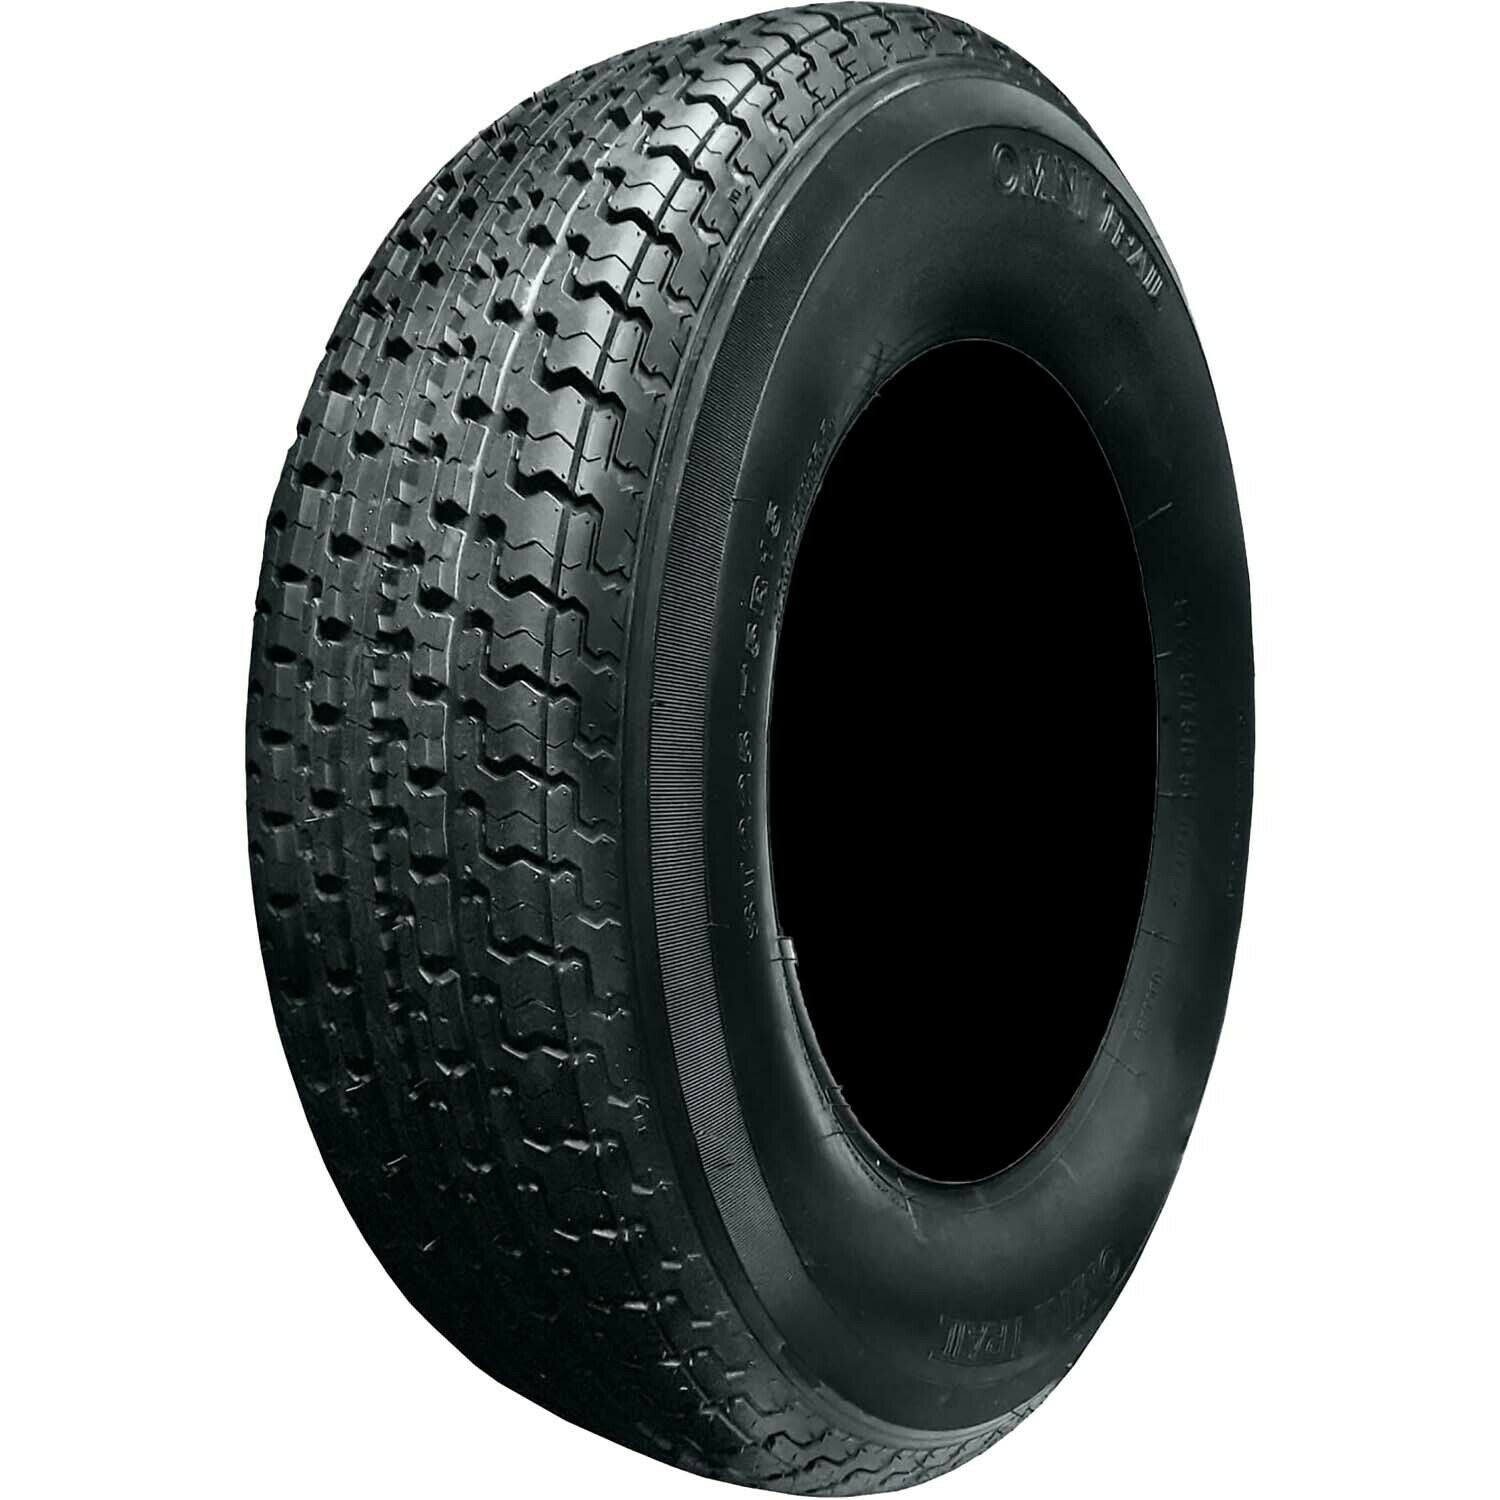 Omni Trail Radial Trailer Tire LRE 10ply ST235/80R16